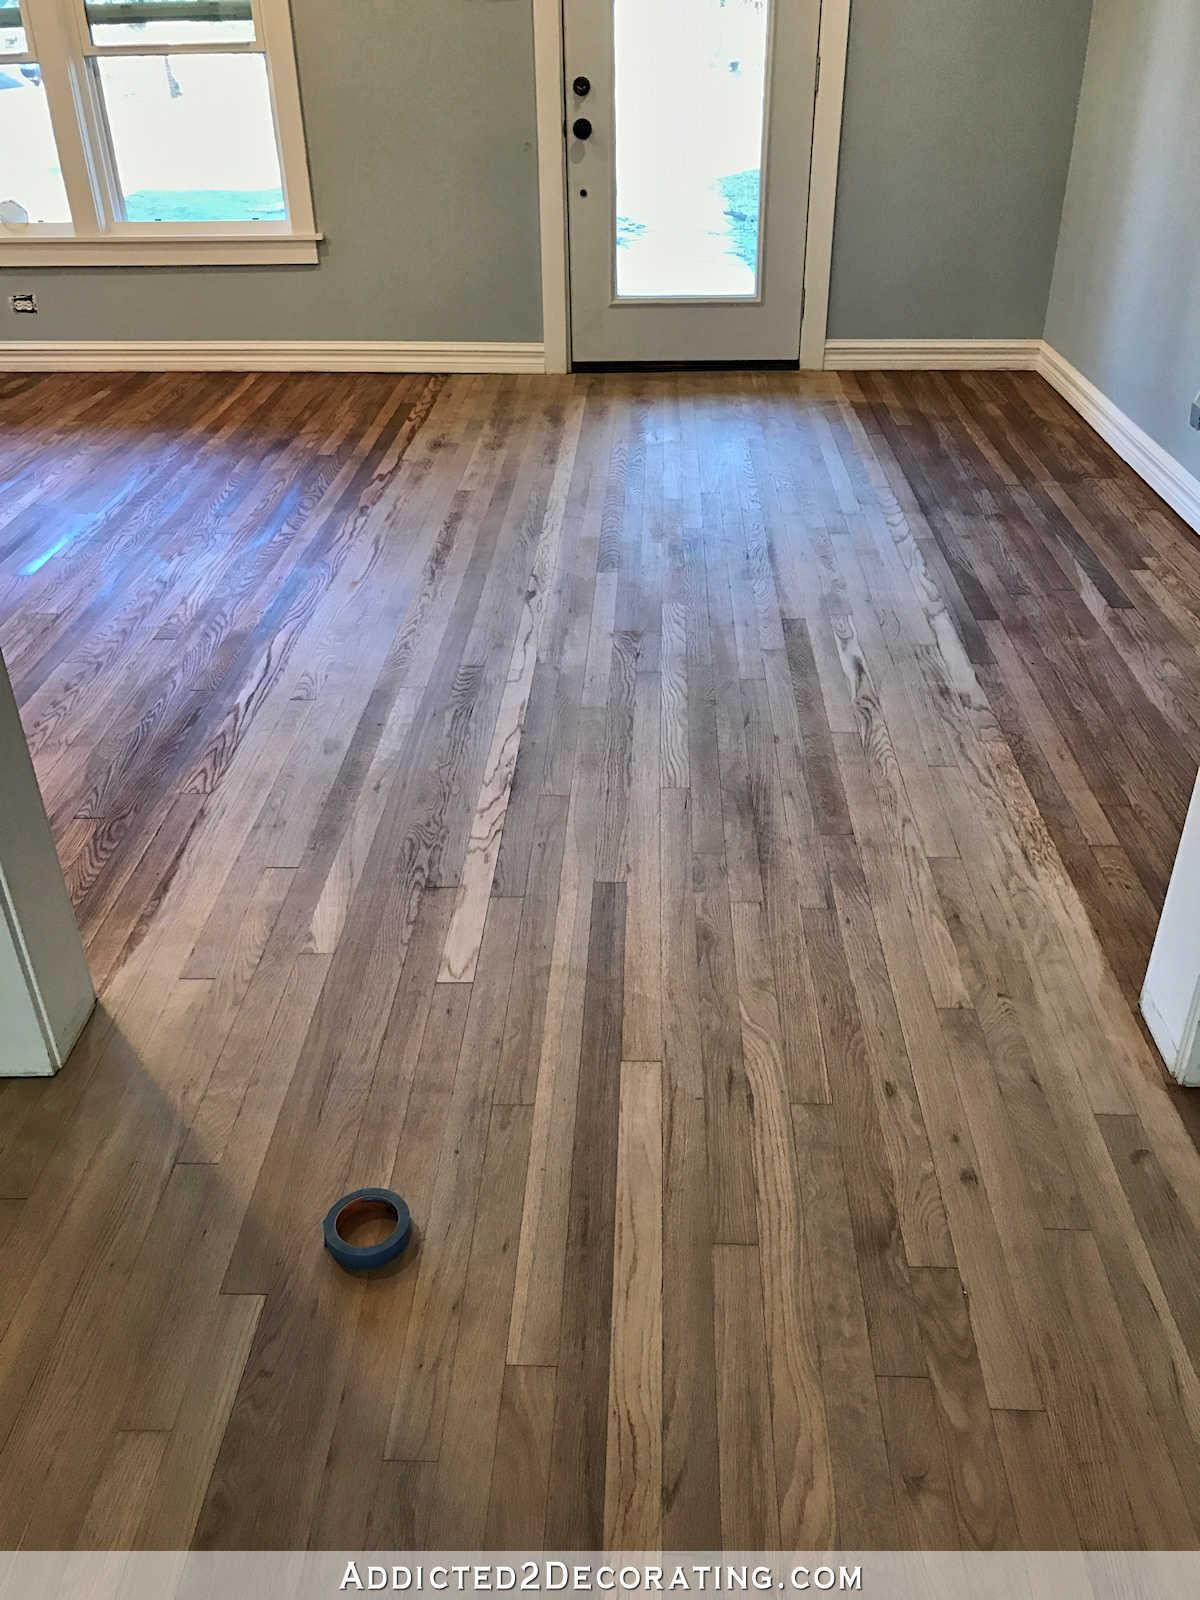 16 Lovely Price for Sanding and Refinishing Hardwood Floors 2022 free download price for sanding and refinishing hardwood floors of luxury of diy wood floor refinishing collection inside e of the earliest diy renovations we tackled at the totsreno farmhouse was refinis